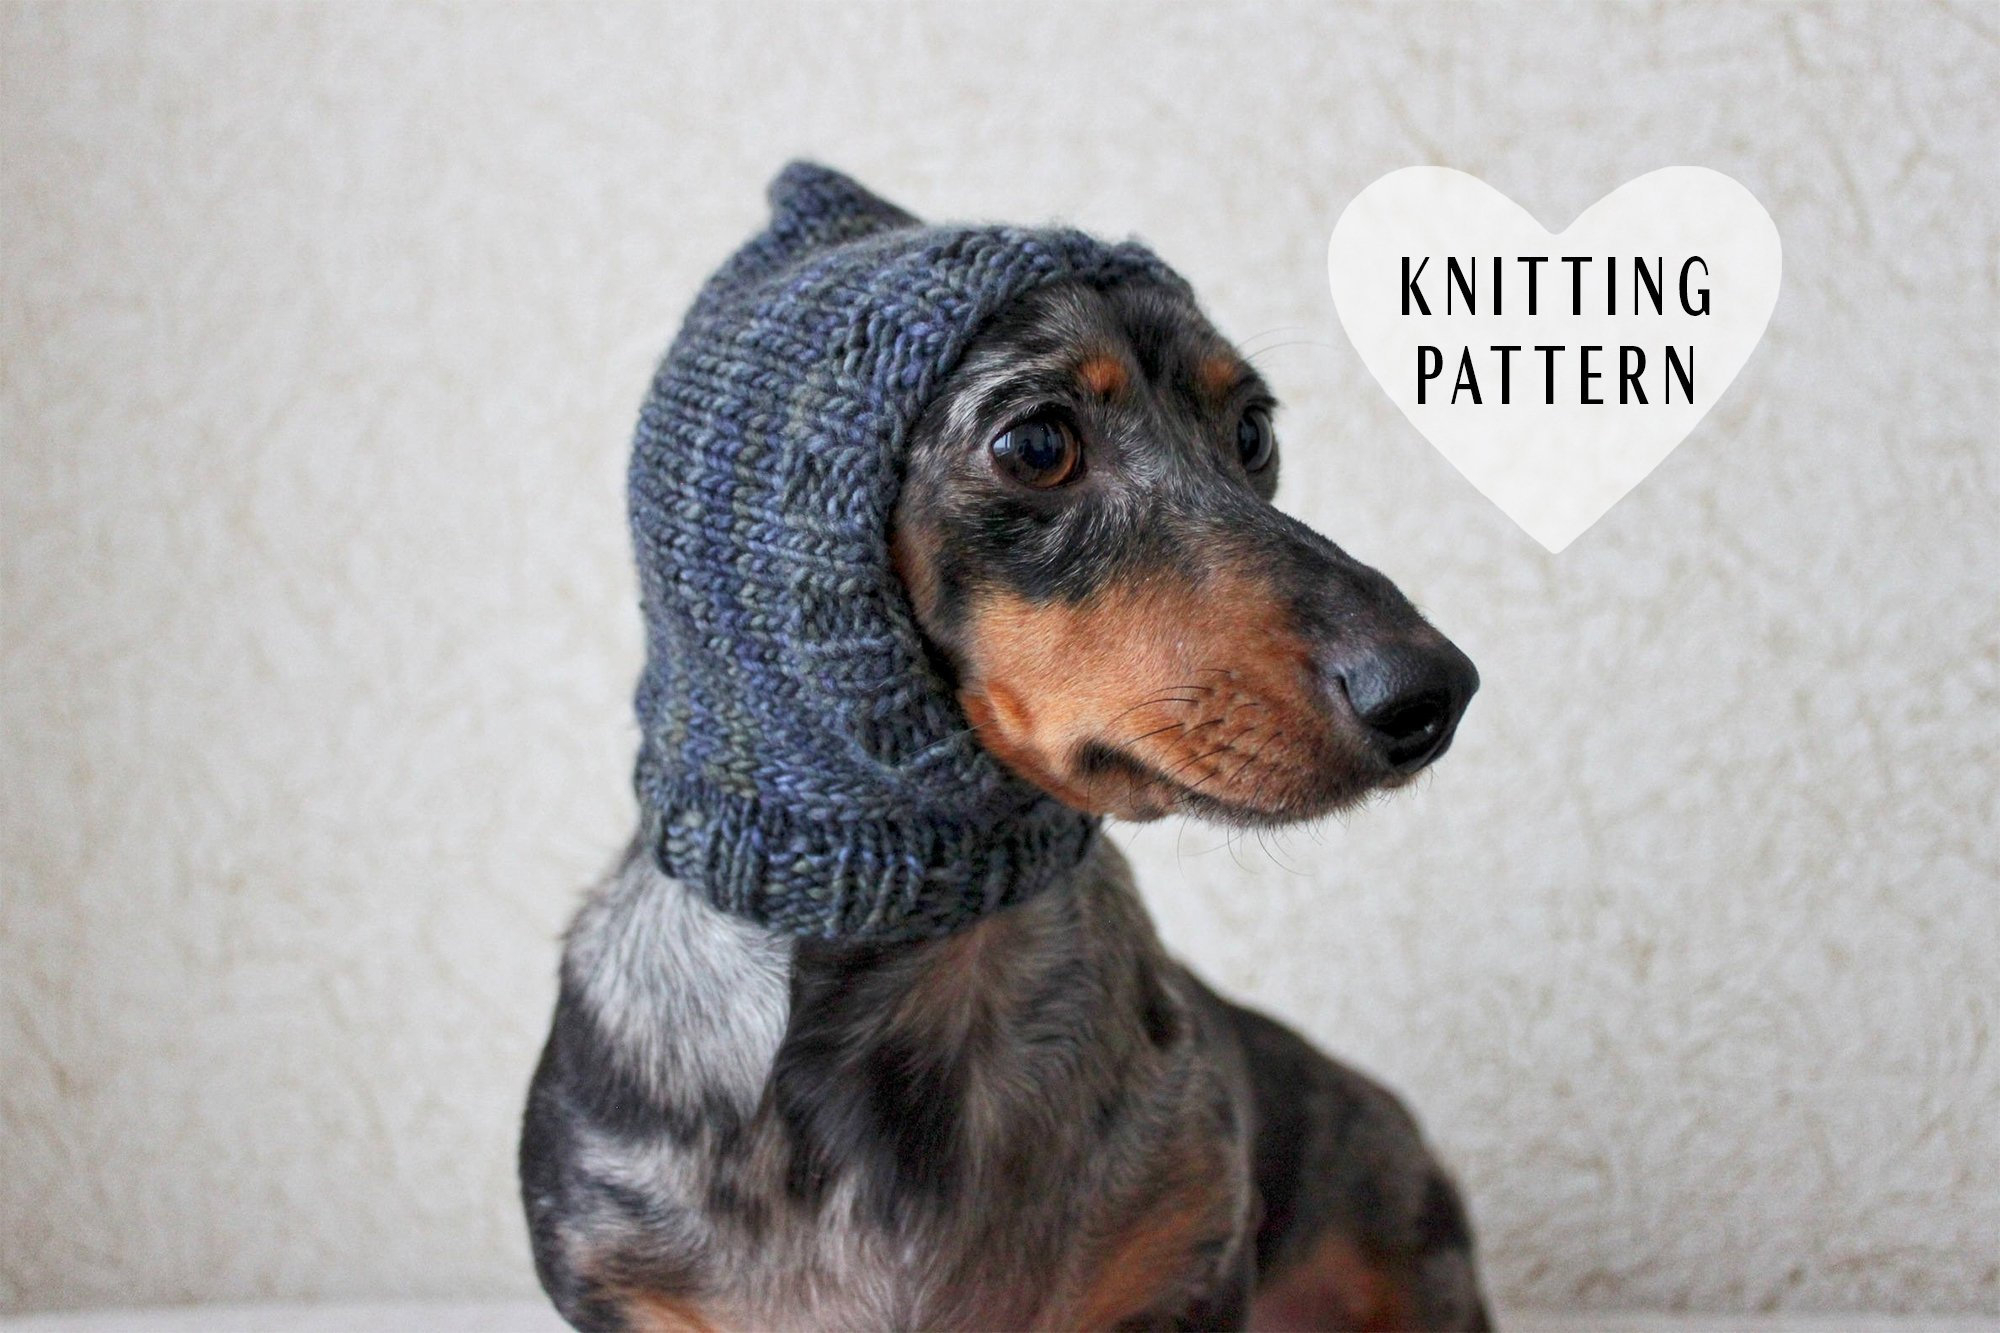 Knitting Pattern Dog Knitting Pattern Dog Hat Knit Hat Pet Clothing Pets Pet Clothes Dogs Mini Dachshund Little Dog Knitted Hood Diy Gift Wiener Dog